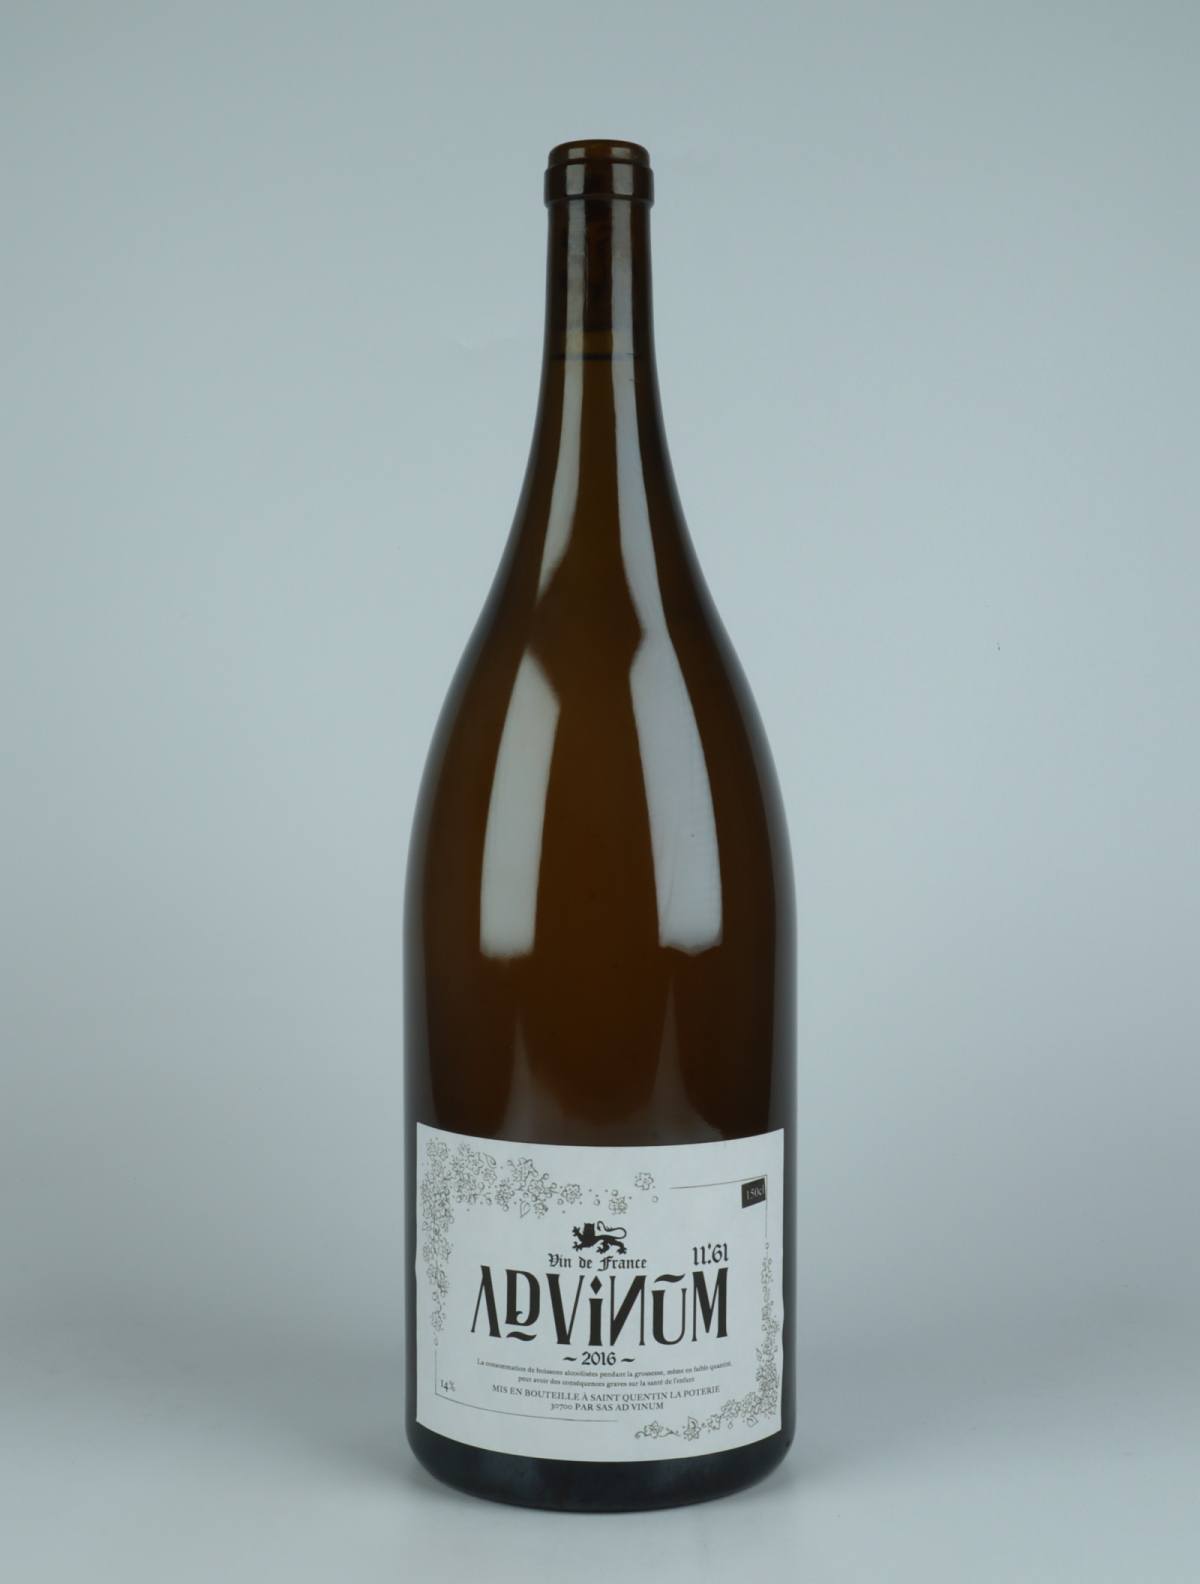 A bottle 2016 11.61 Blanc White wine from Ad Vinum, Gard in France